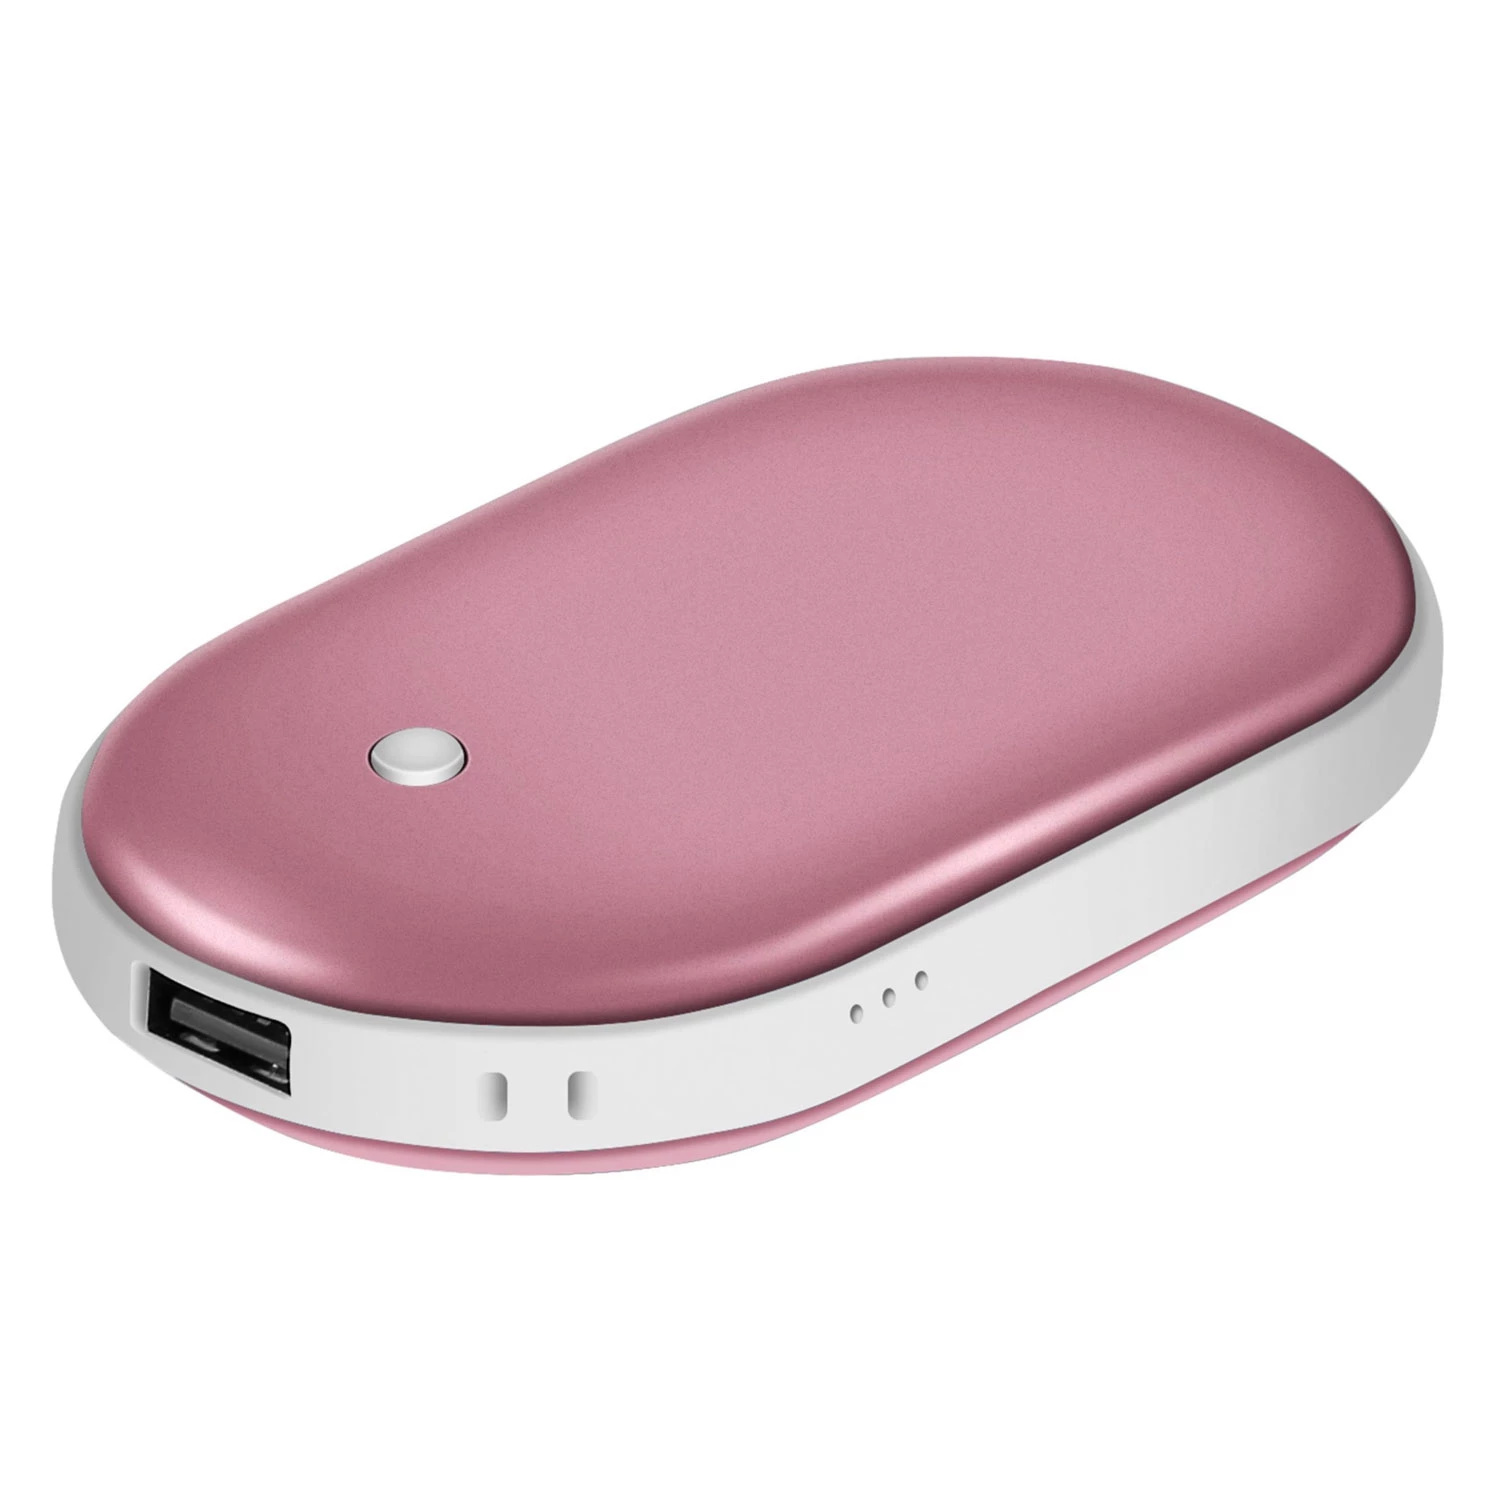 5000mAh Portable Hand Warmer & Power Bank - Rechargeable, Double-Sided Heating